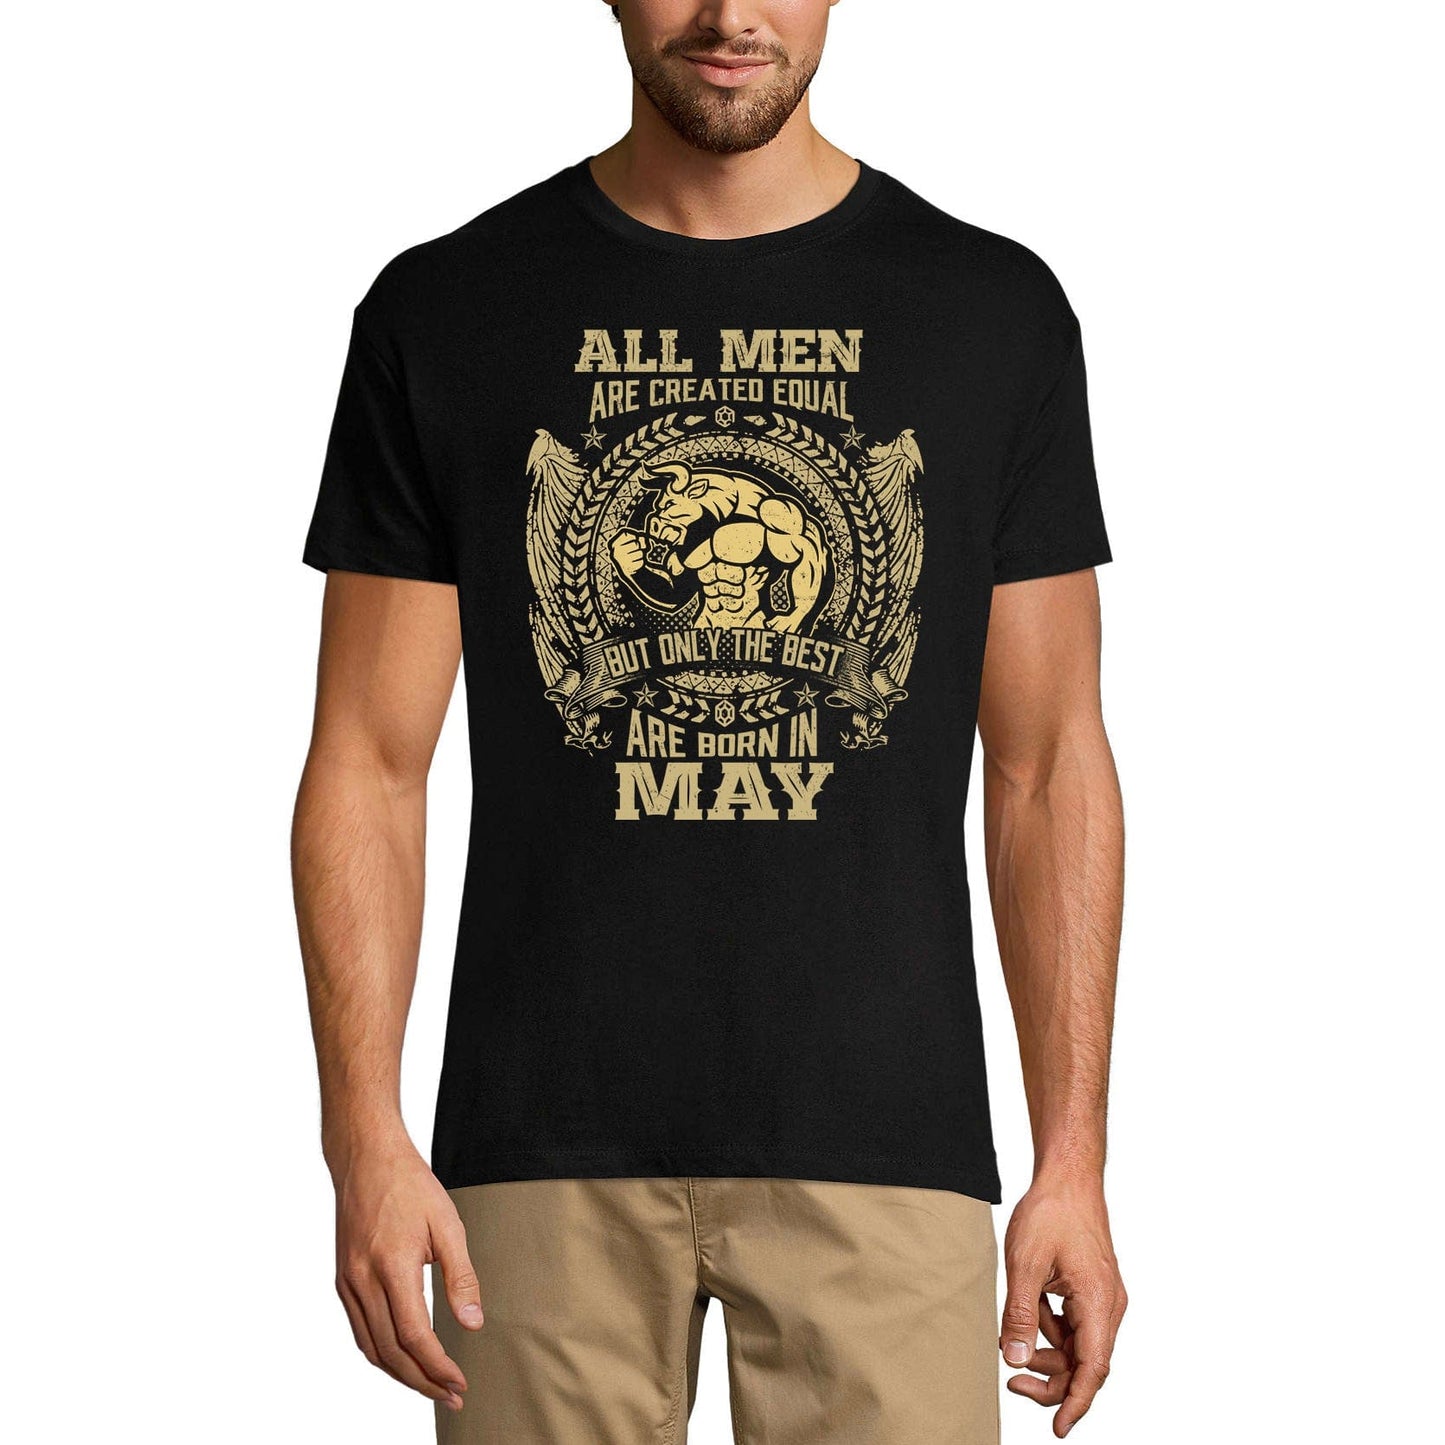 ULTRABASIC Men's Vintage T-Shirt Only the Best are Born in May - Birthday Gift Tee Shirt